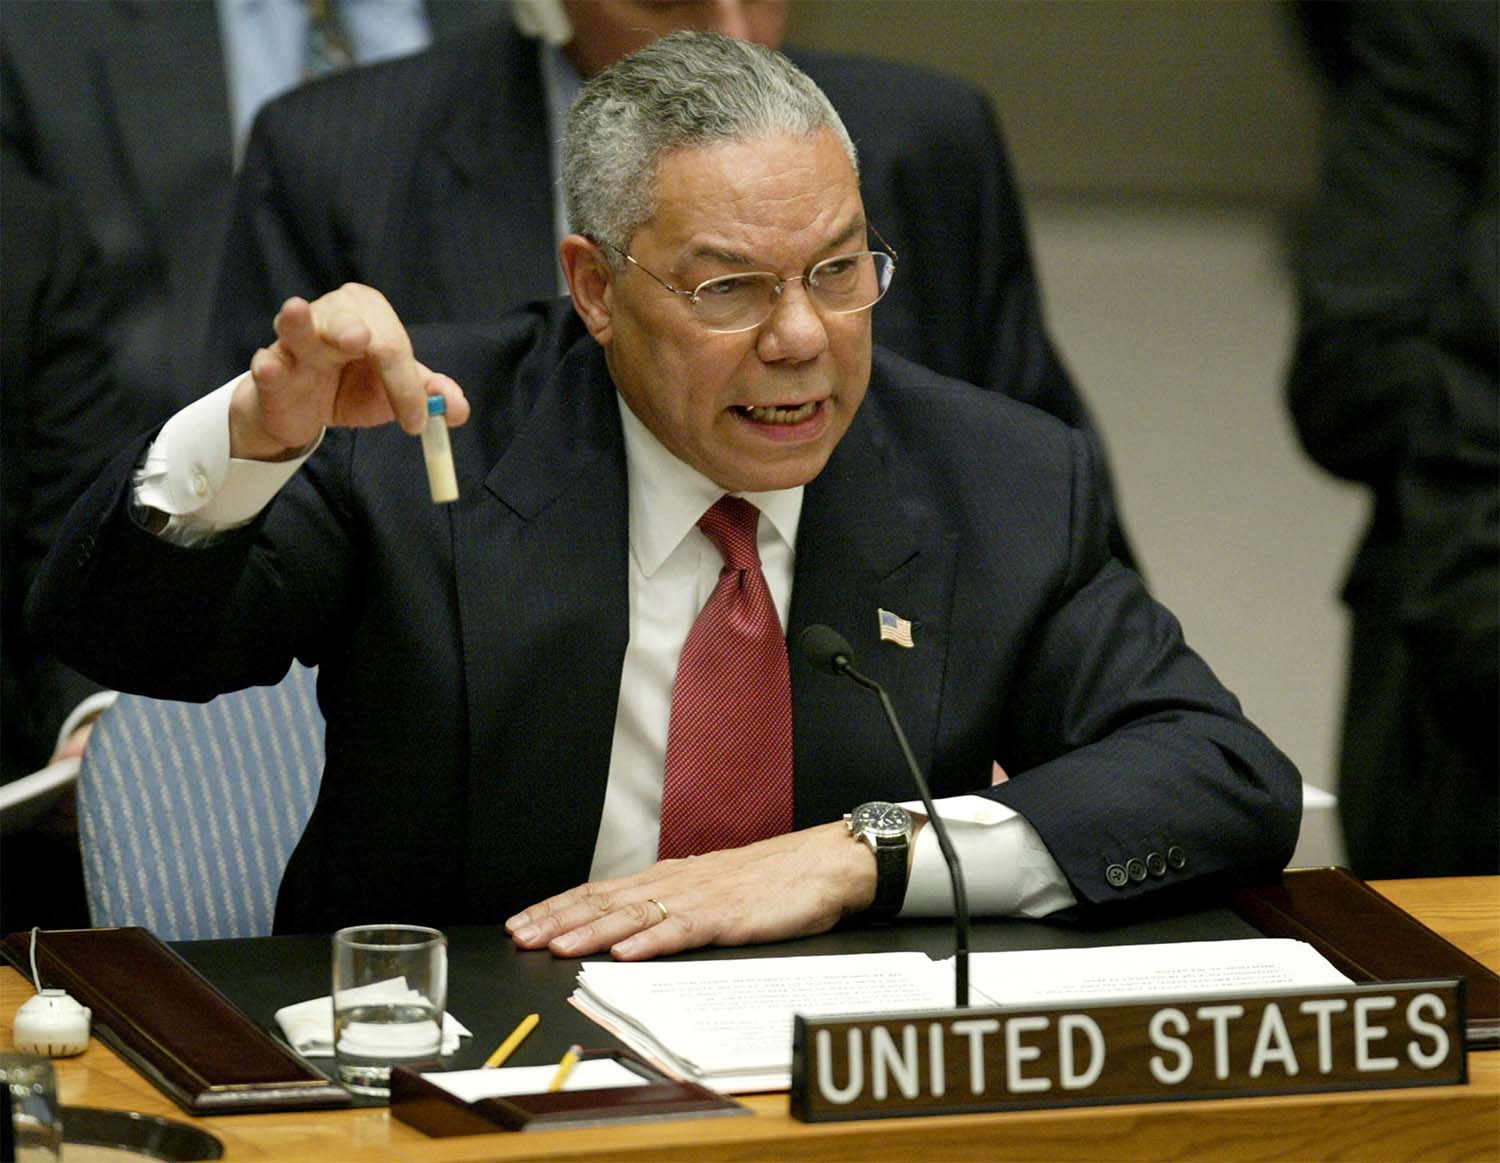 Powell’s UN testimony resulted in the deaths of tens of thousands of Iraqis